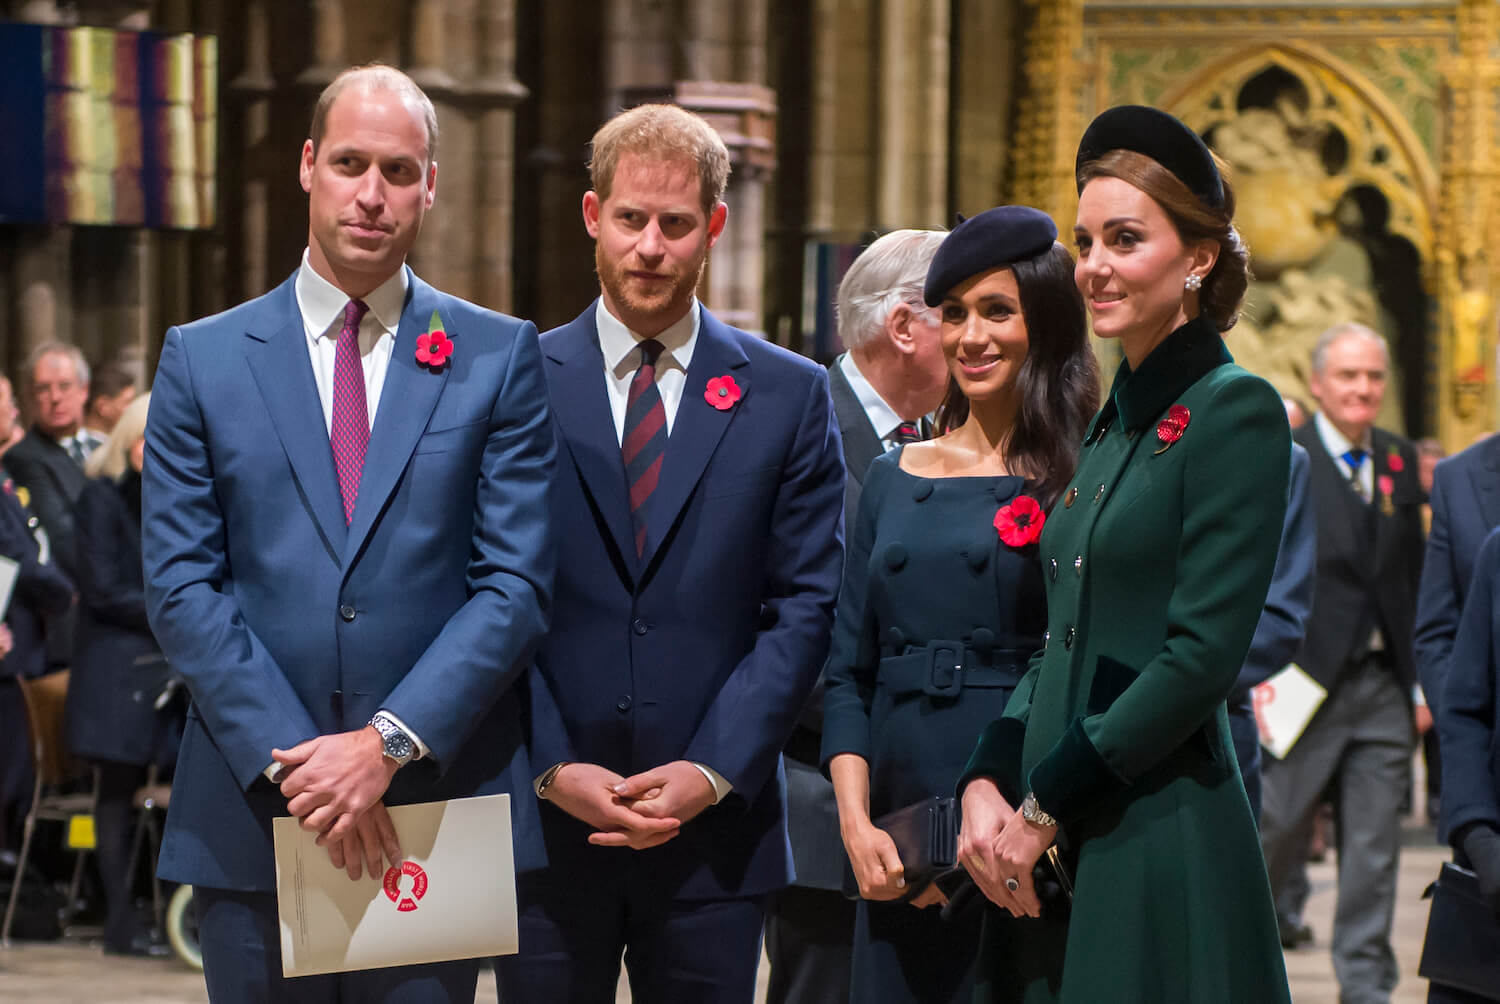 Prince William didn't show any warmth toward Meghan Markle, seen here standing with Prince Harry and Kate Middleton